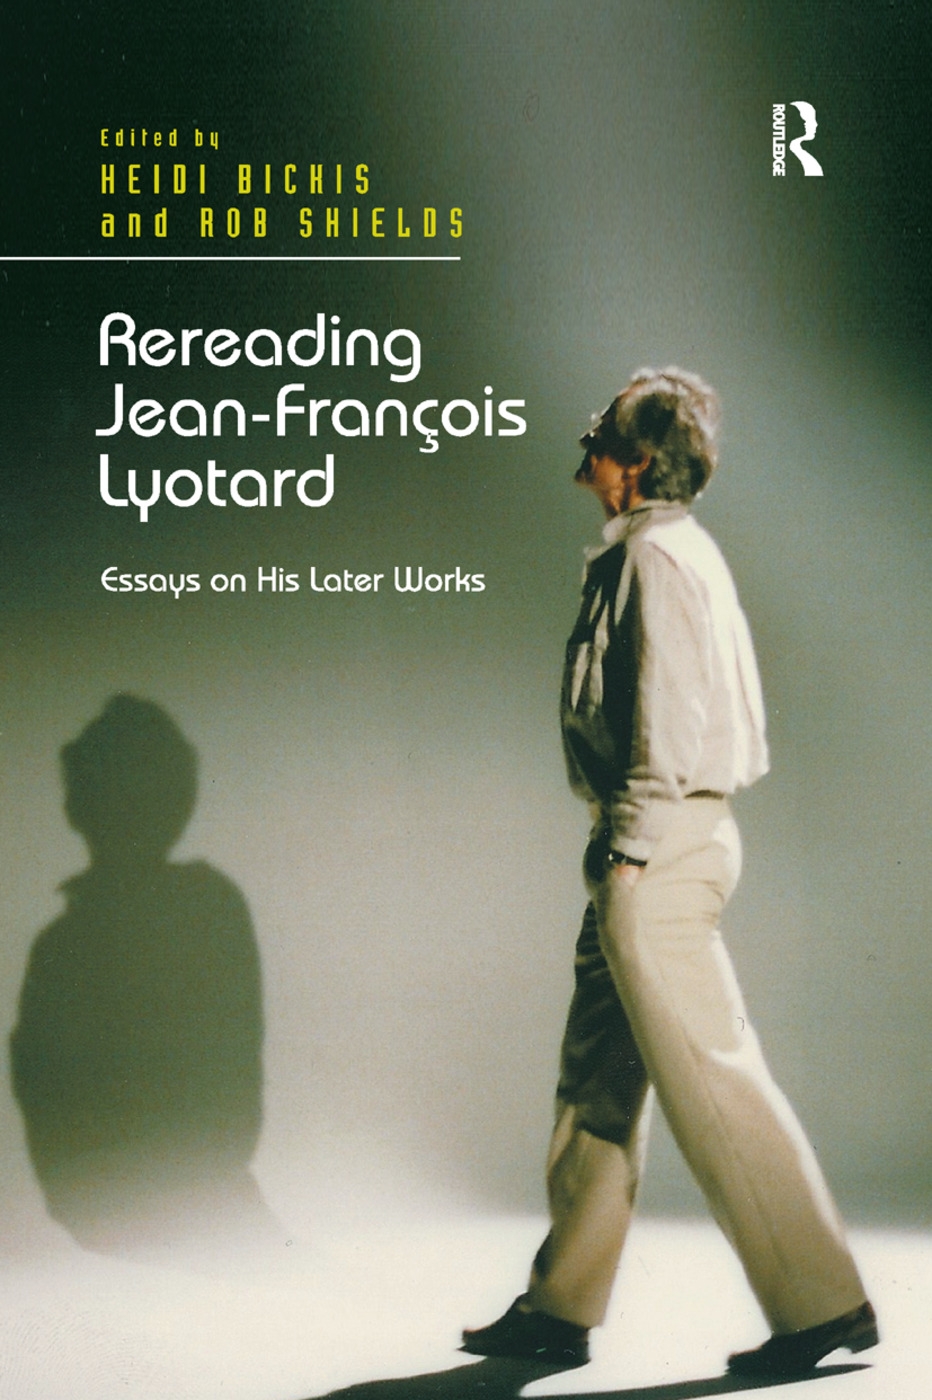 Rereading Jean-François Lyotard: Essays on His Later Works